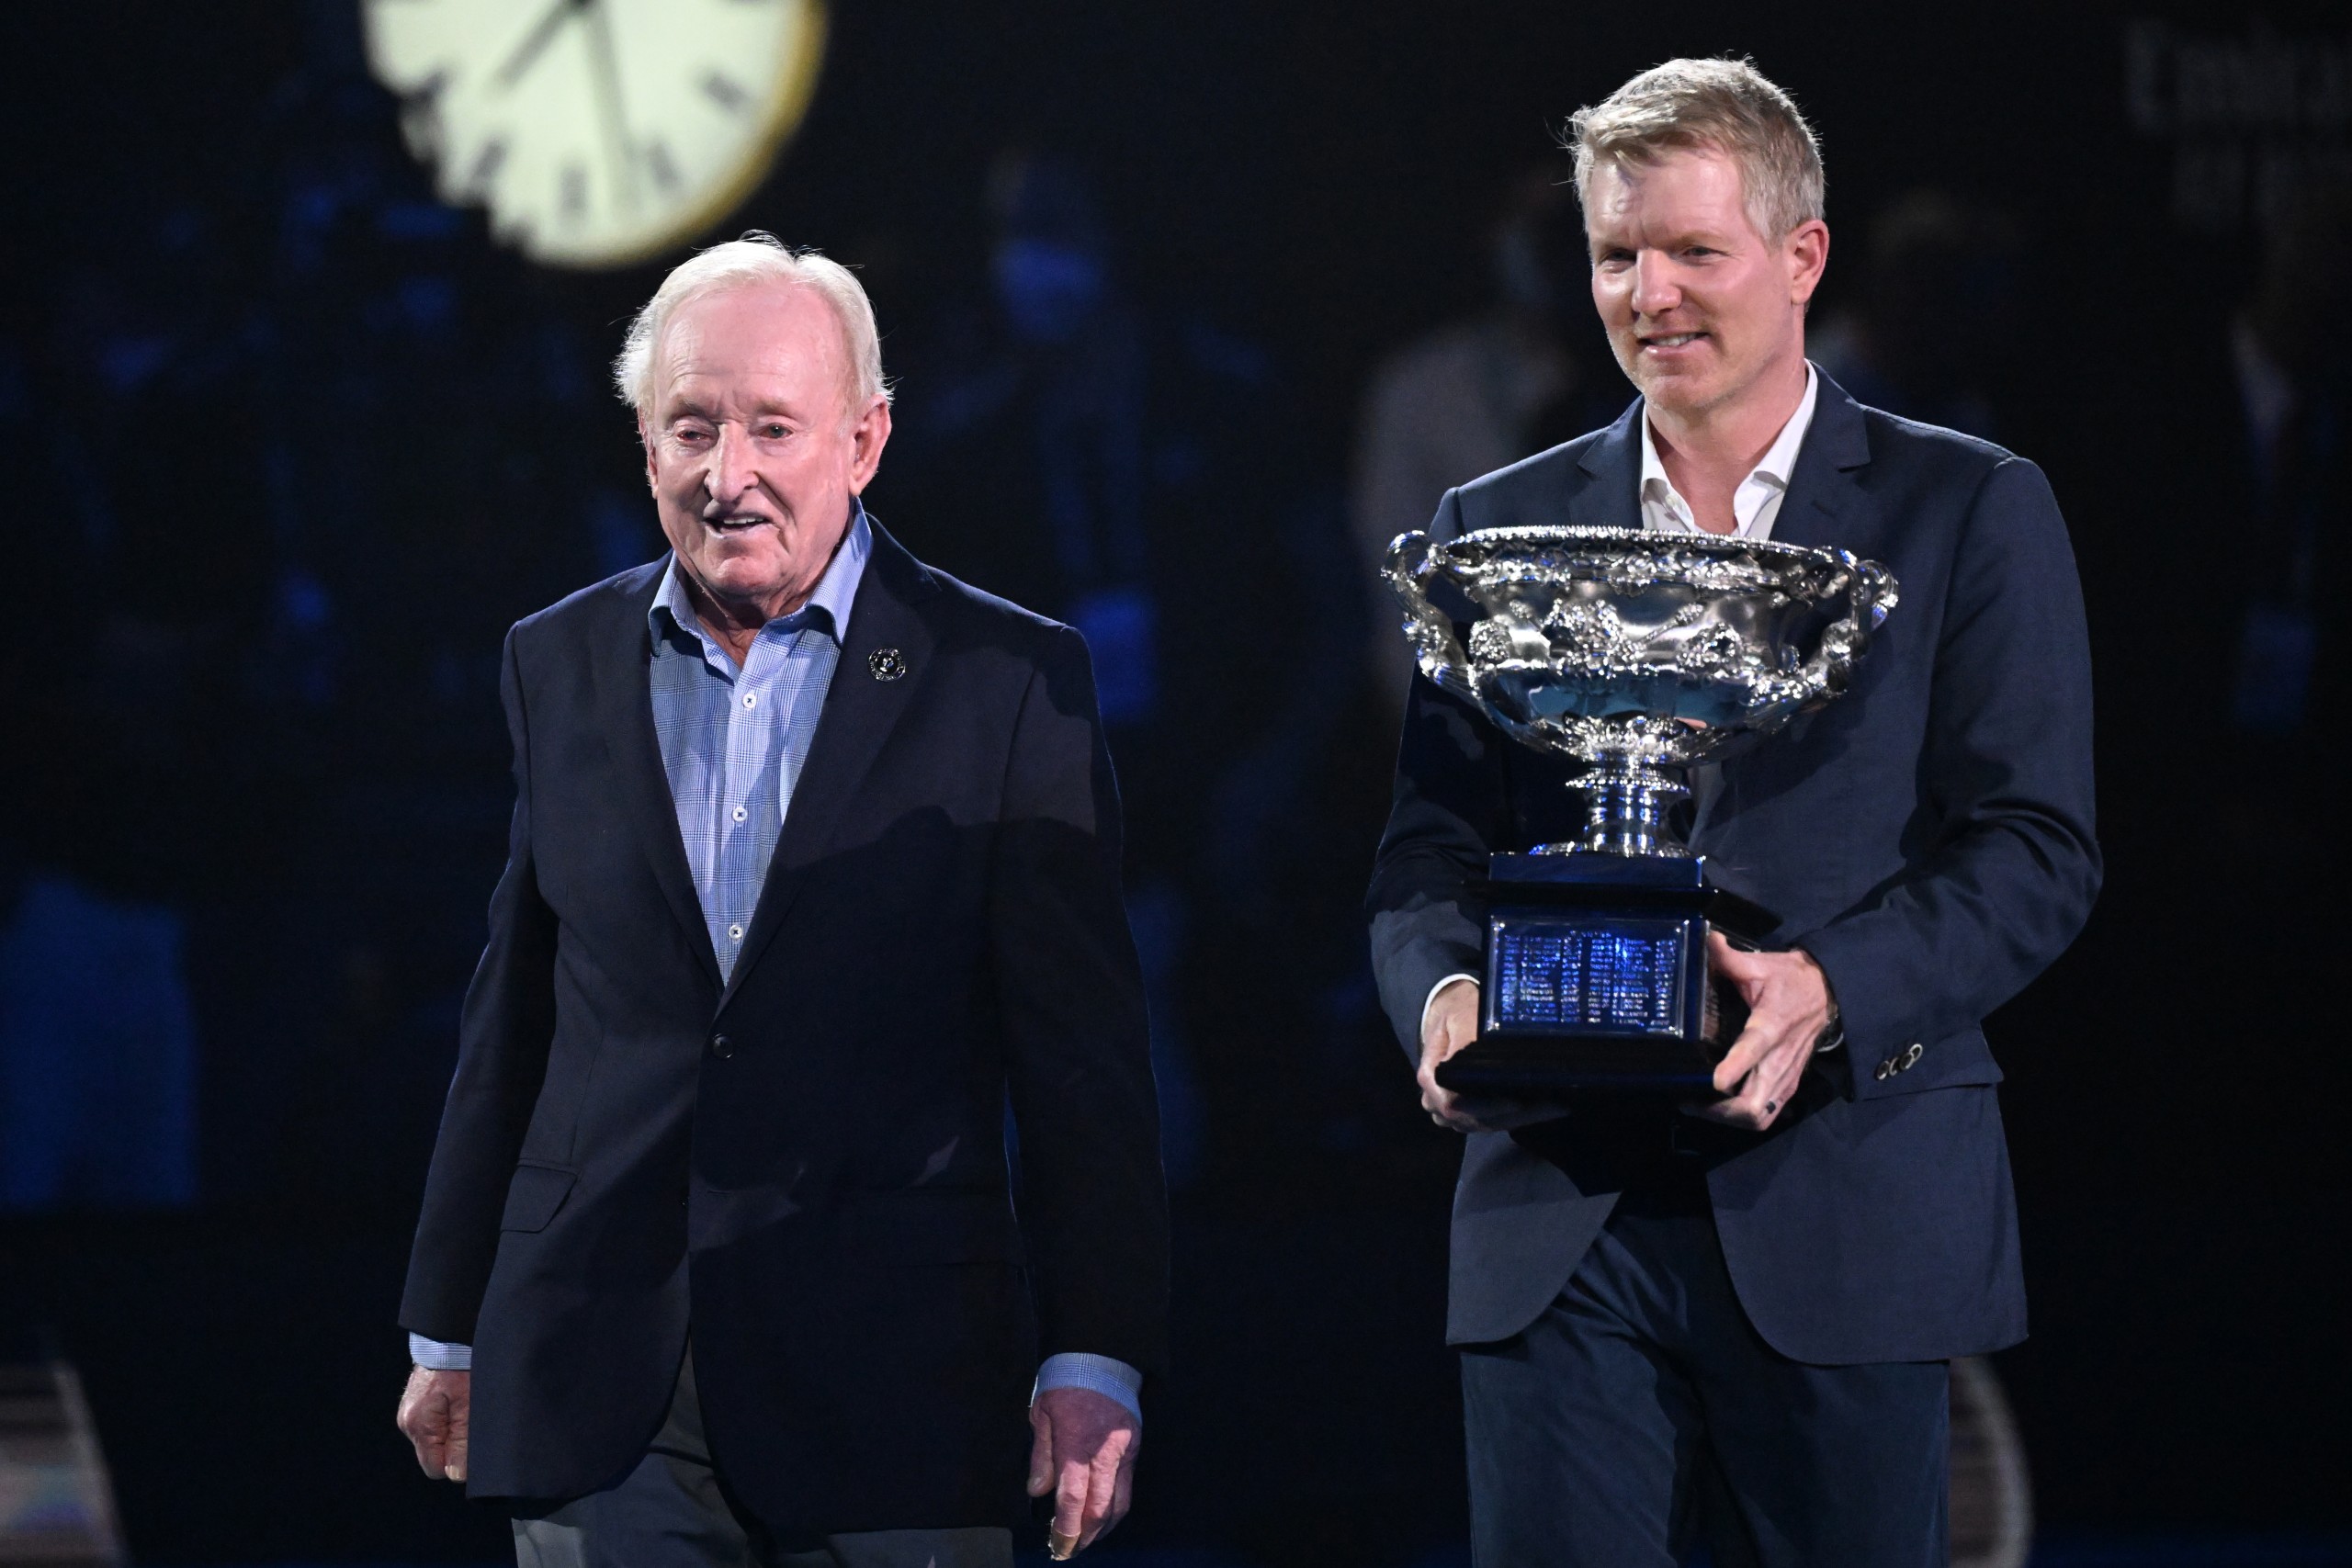 epa09717801 Former tennis greats Jim Courier (R) and Rod Laver with the Norman Brooks Challenge Cup before the men’s singles final between Rafael Nadal of Spain and Daniil Medvedev of Russia at the Australian Open grand slam tennis tournament at Melbourne Park in Melbourne, Australia, 30 January 2022.  EPA/DEAN LEWINS AUSTRALIA AND NEW ZEALAND OUT